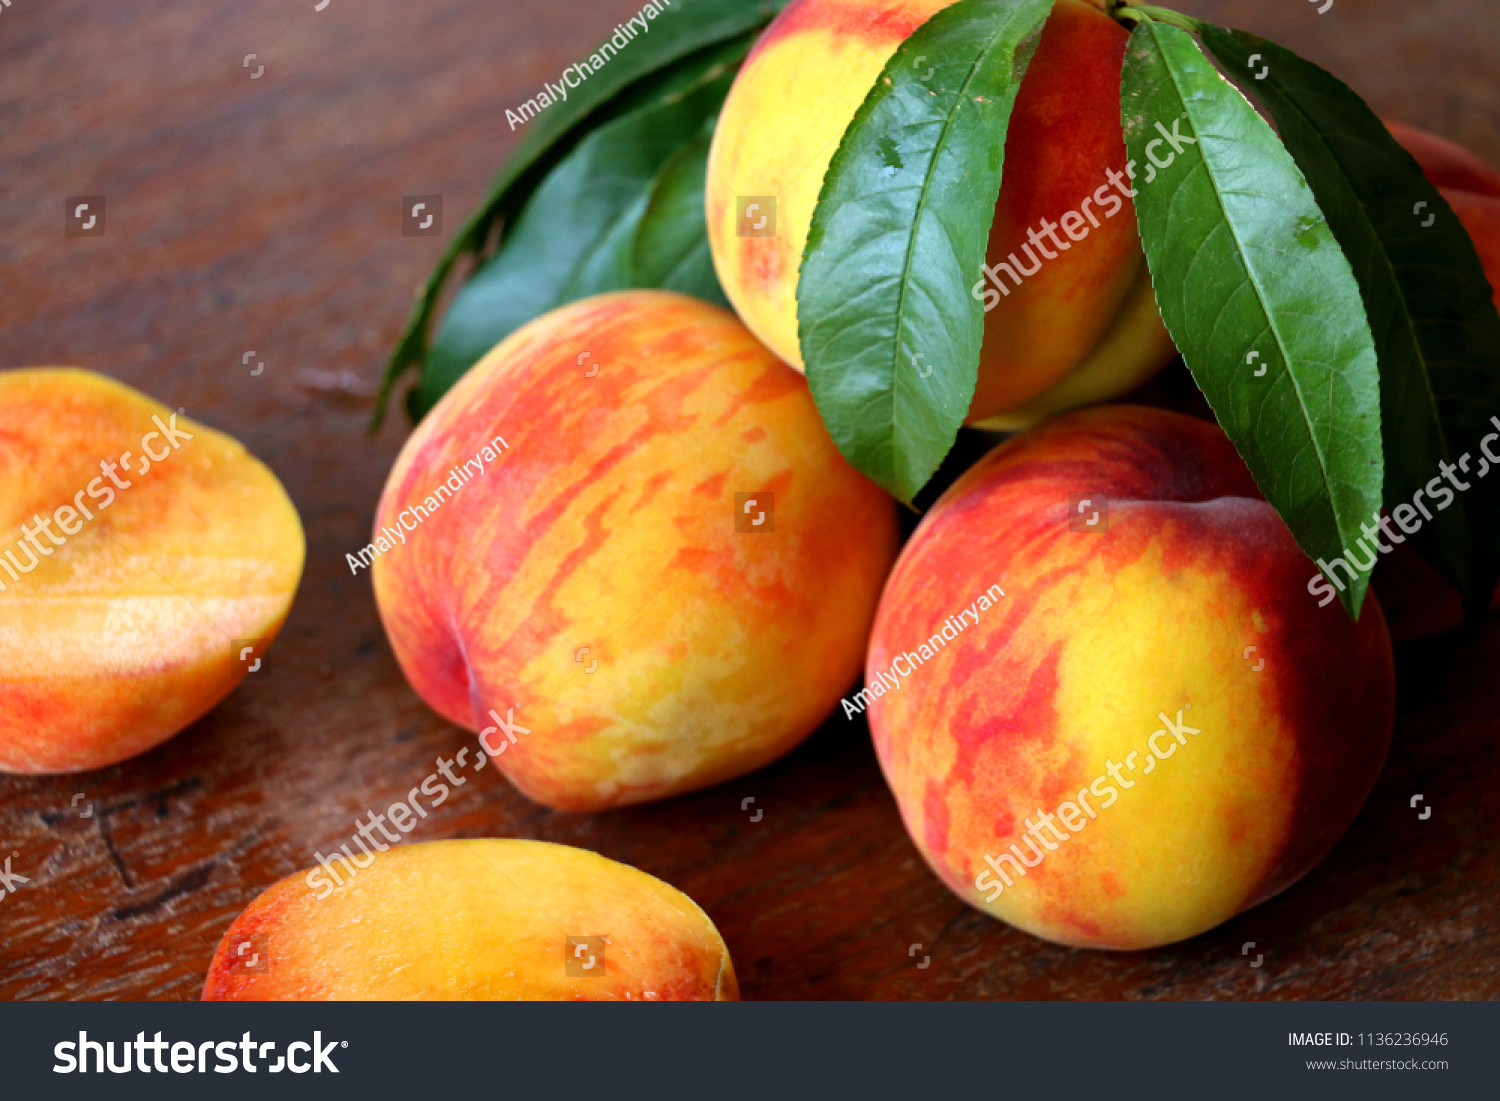 
Peach fruit with leaf  on a wooden background. #1136236946